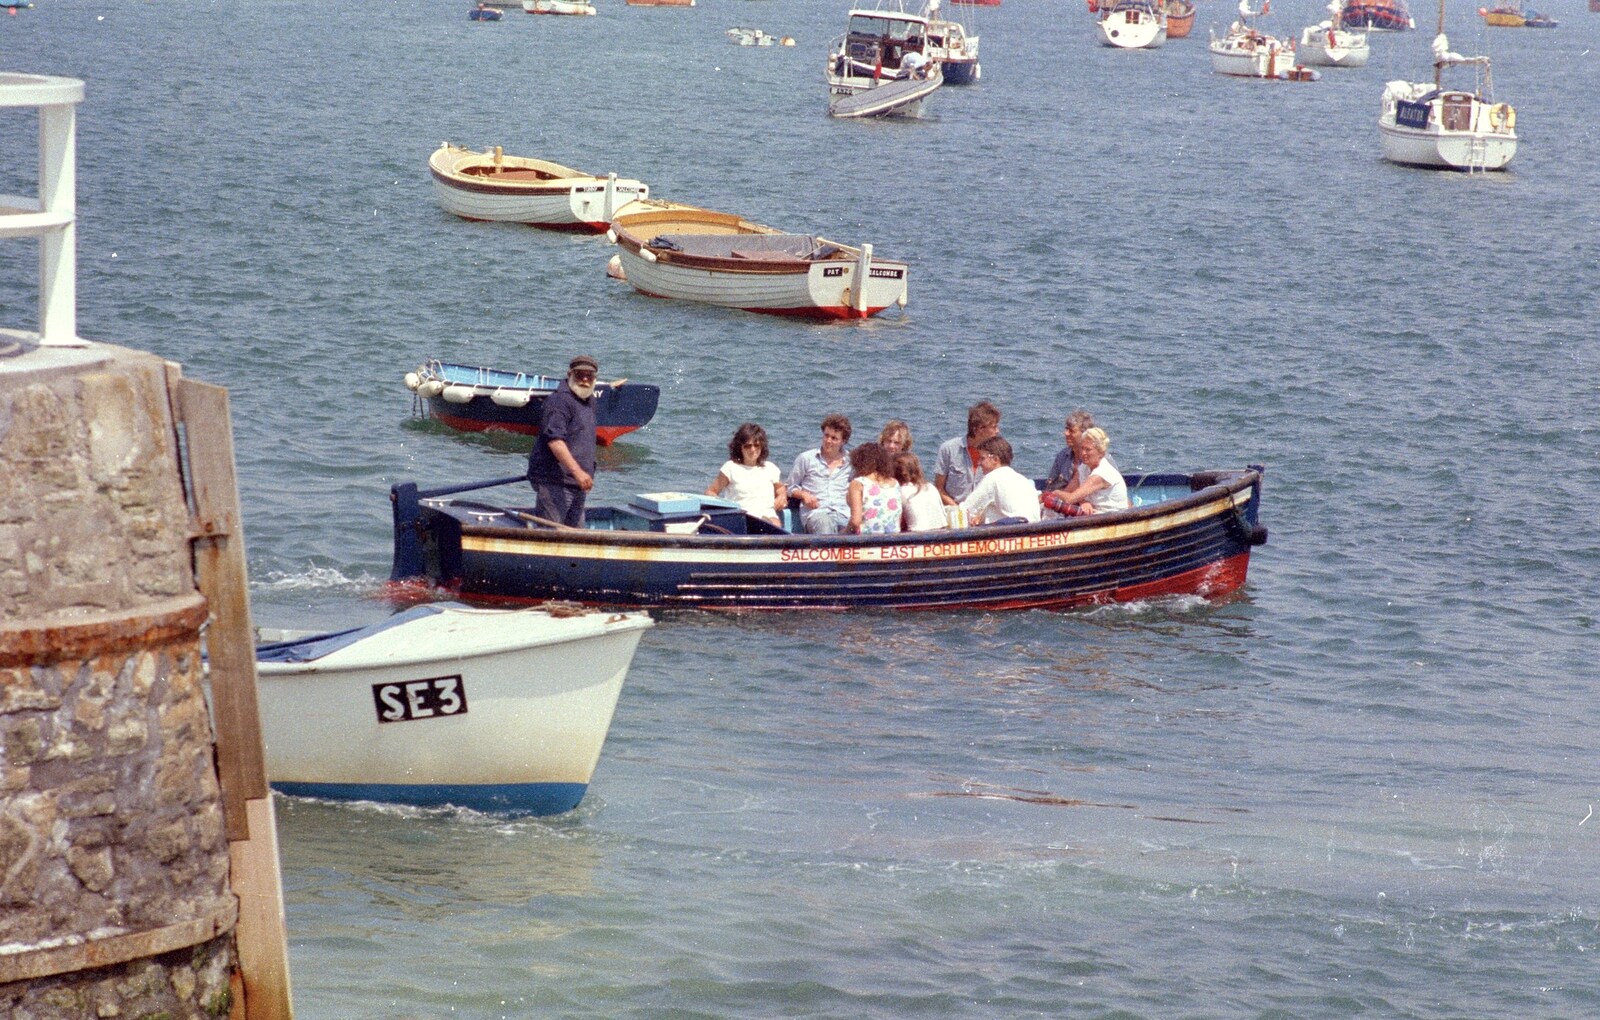 Cap'n Birdseye takes passengers over the river from Uni: Twenty One Guns and Footie on the Beach, Plymouth Hoe and Salcombe, Devon - 15th June 1986